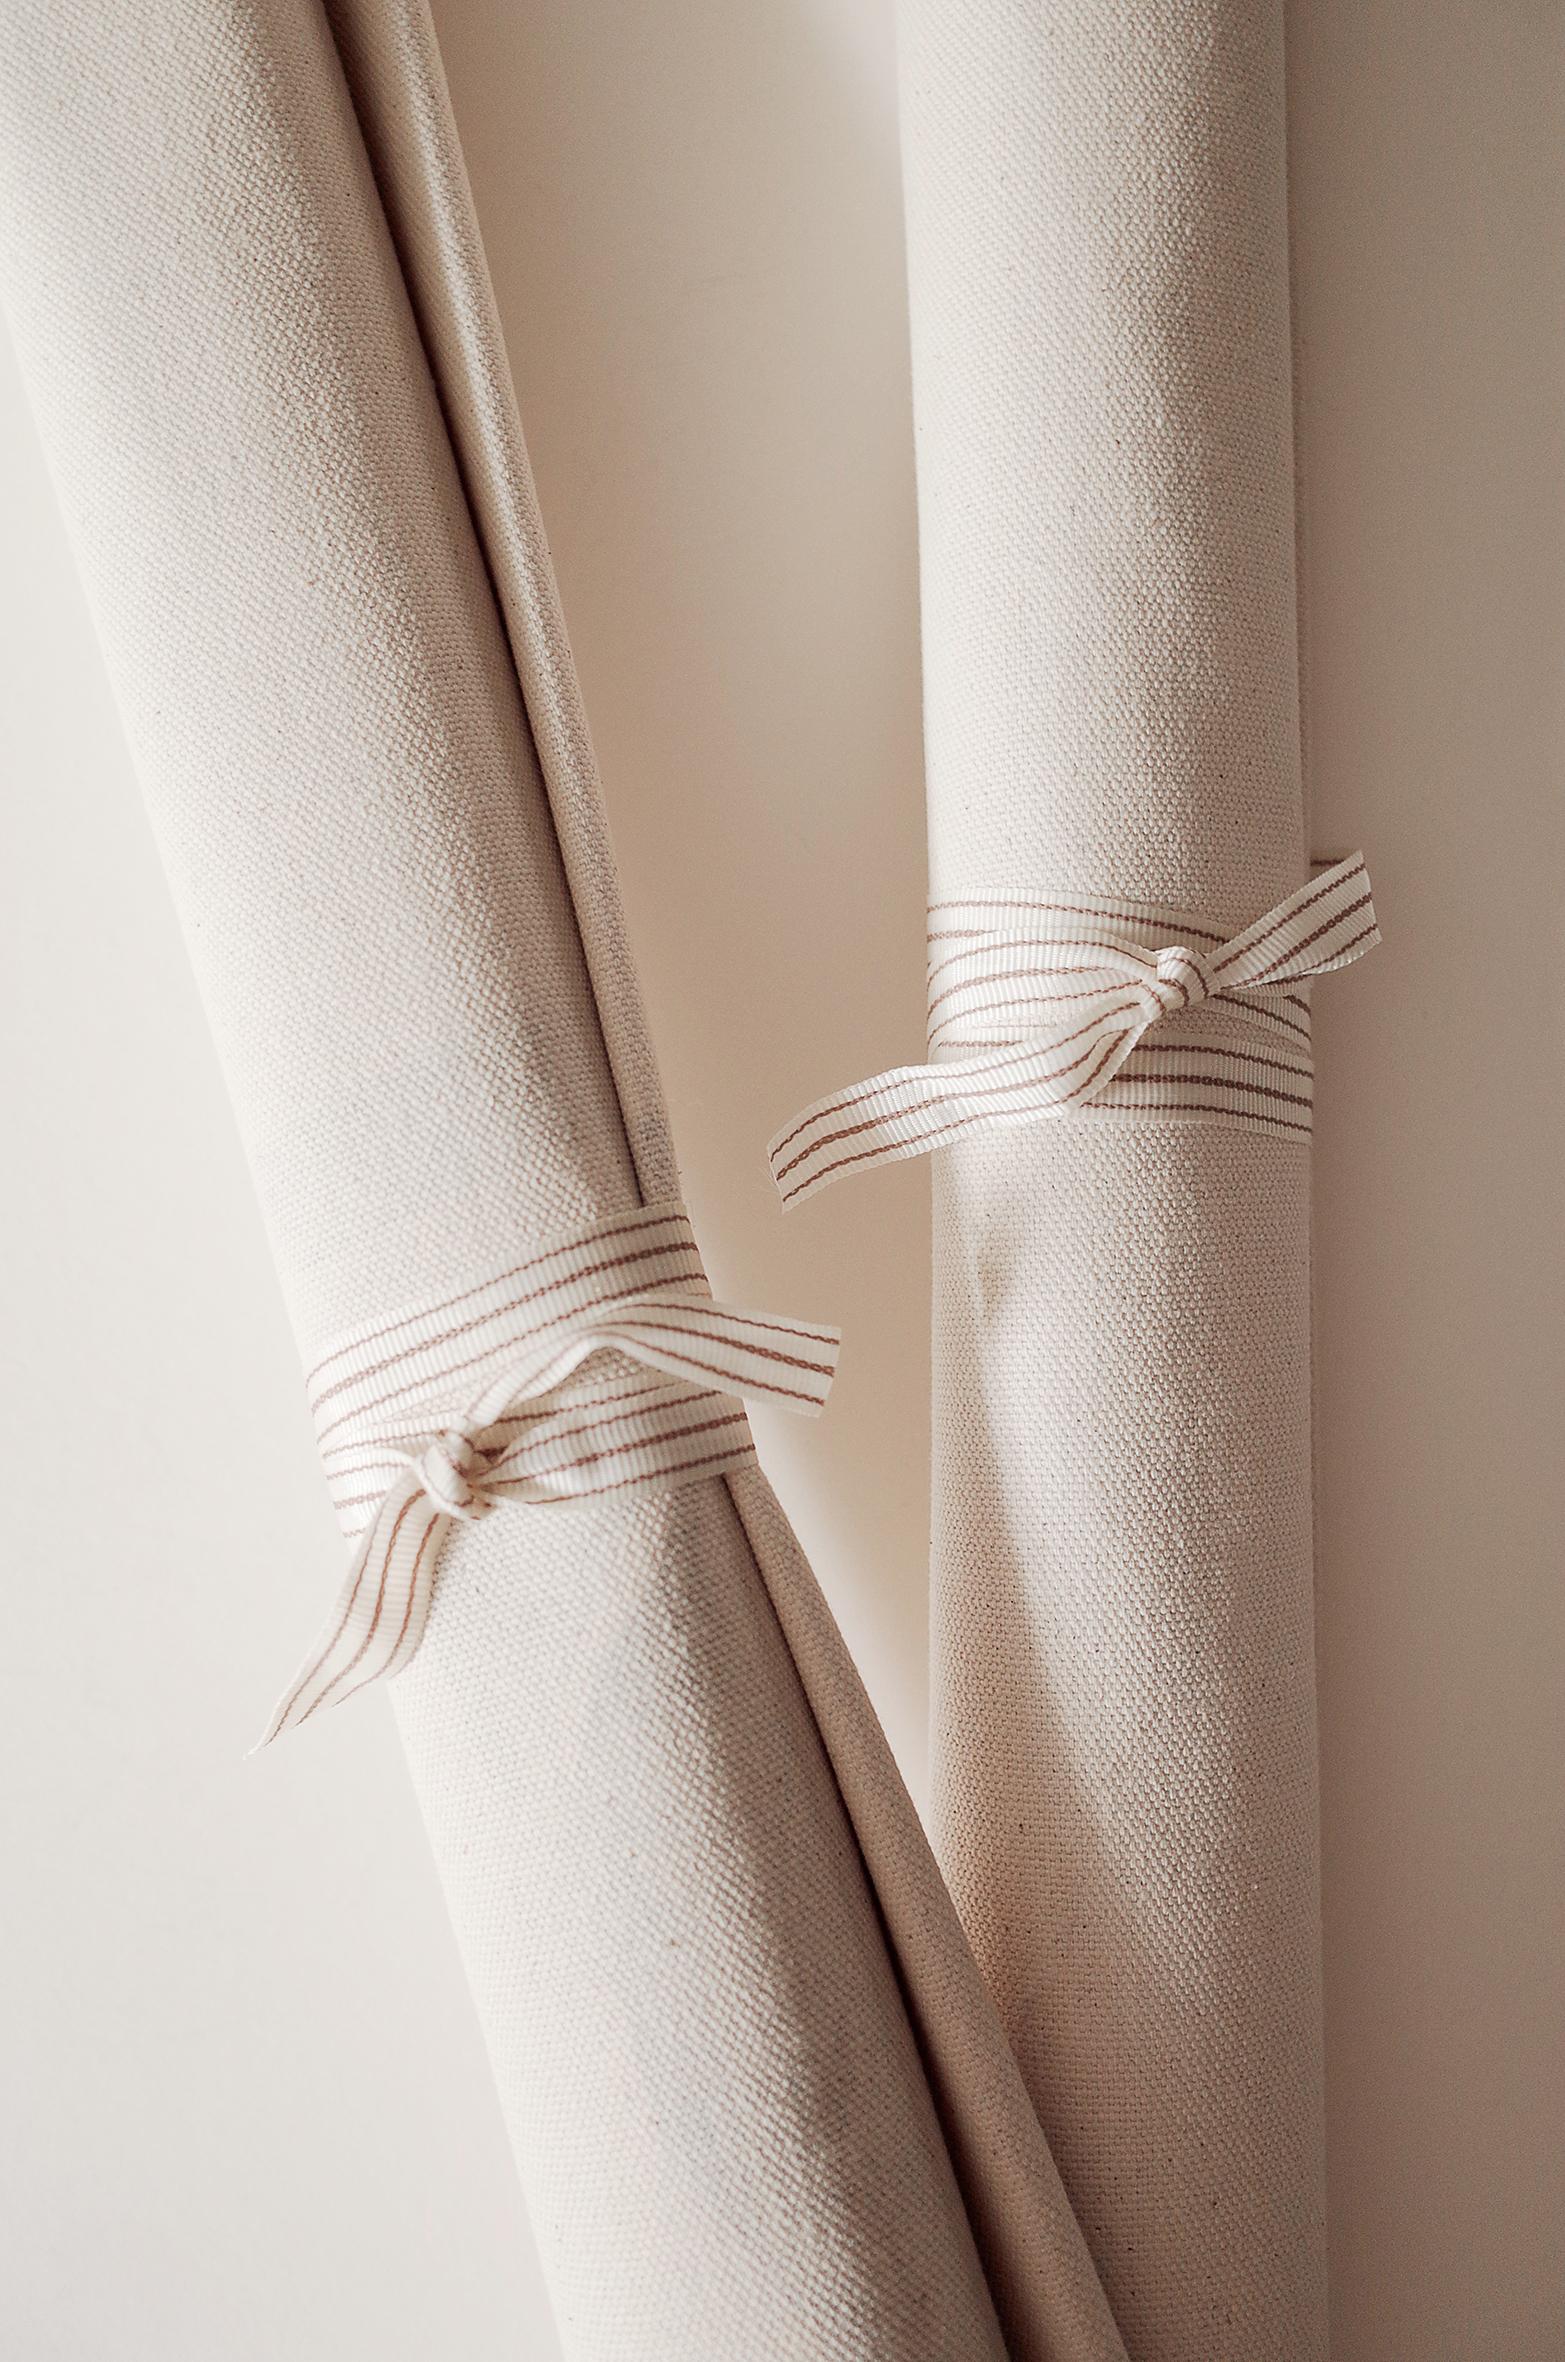 Lily No.3 - organic cotton canvas scroll on bamboo, limited edition of 5 For Sale 2